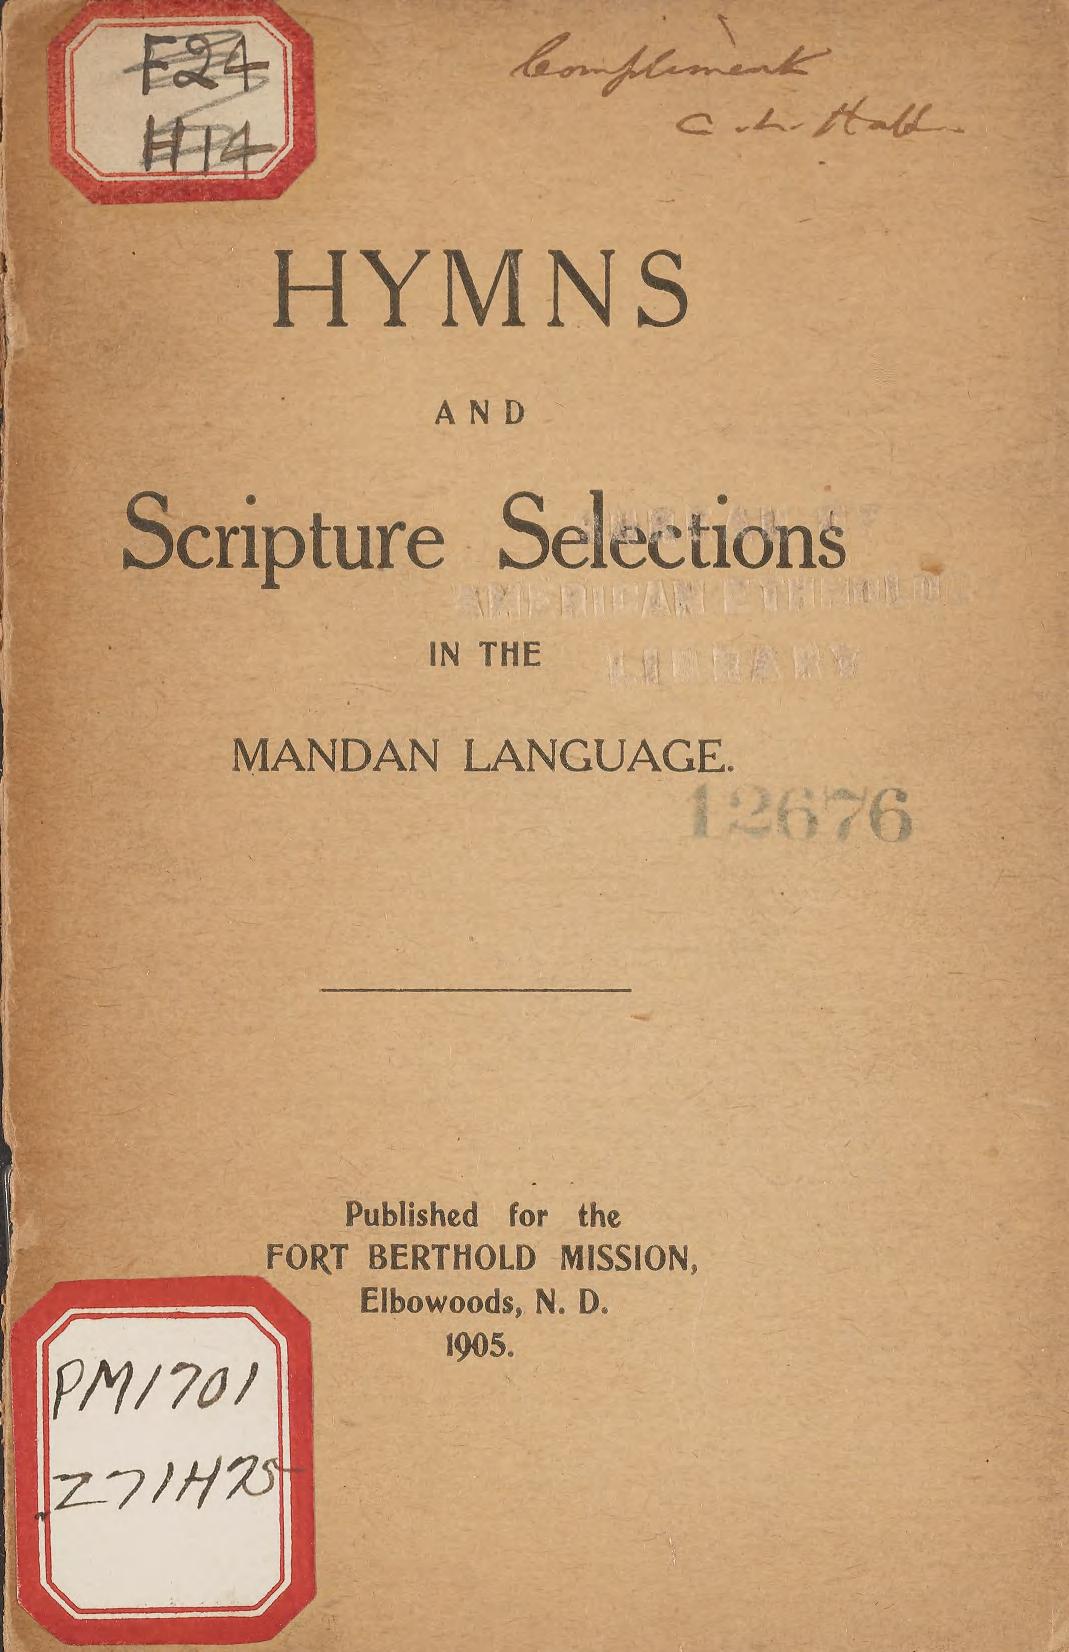 Hymns and scripture selections